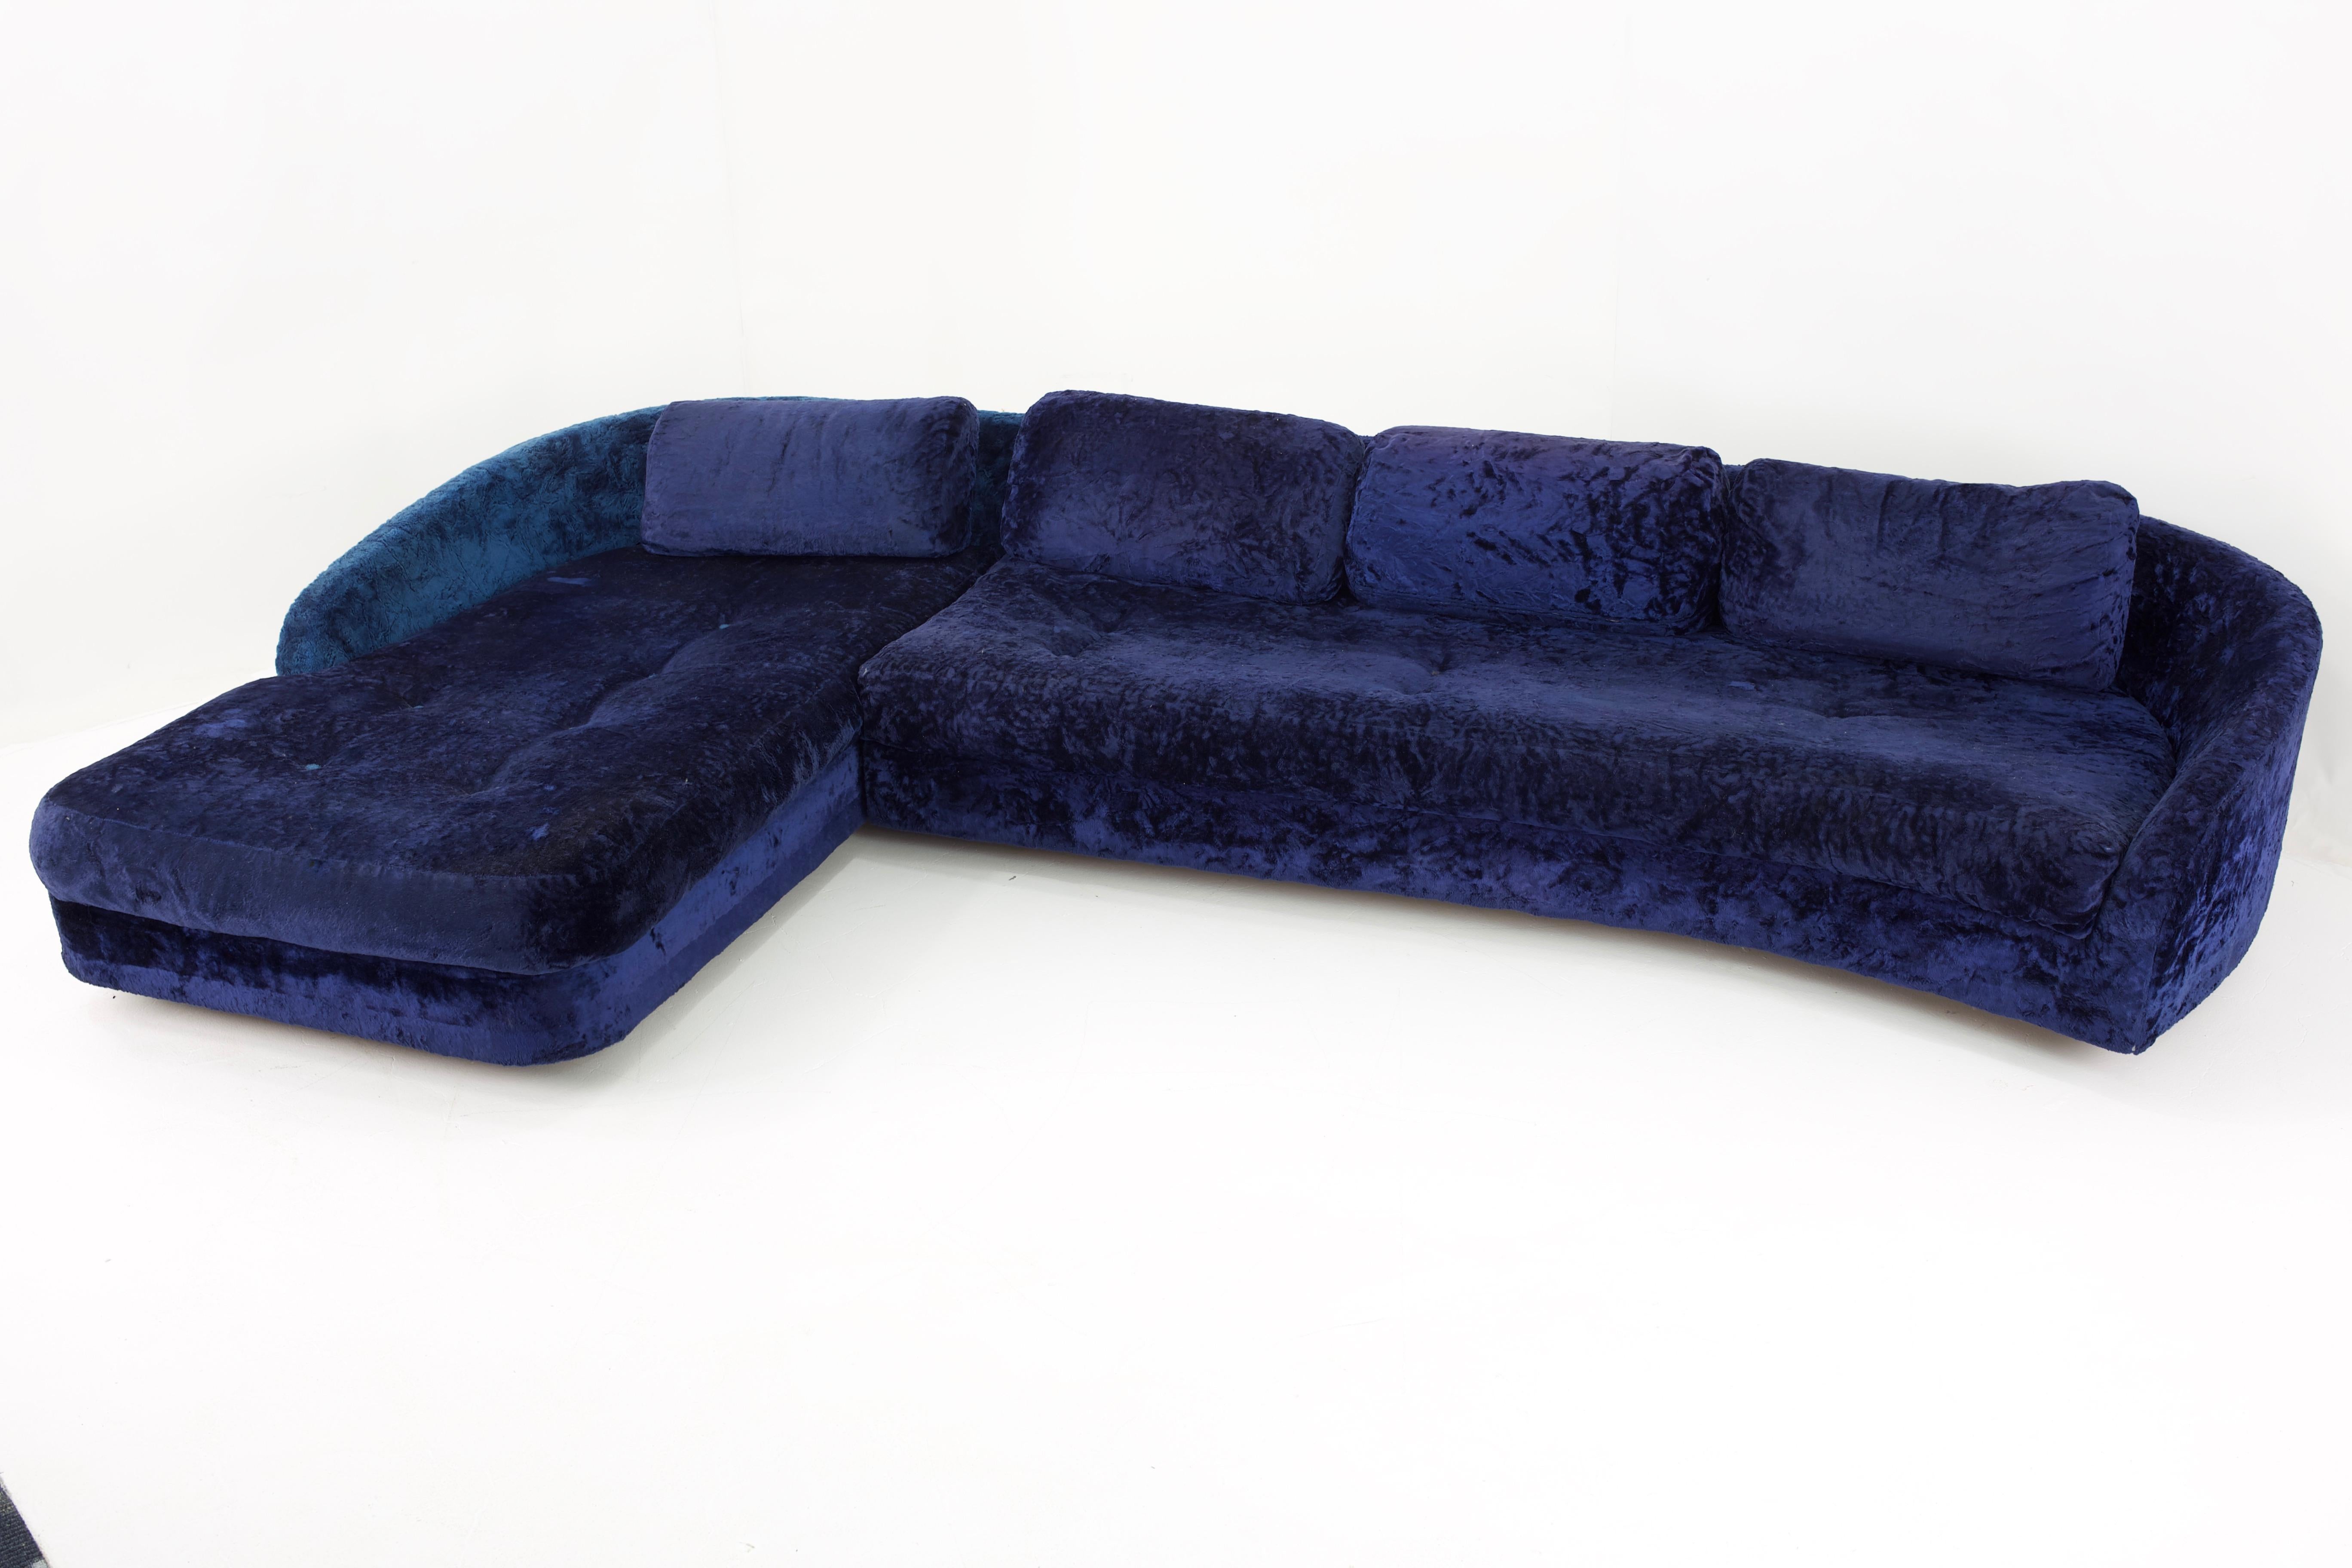 Adrian Pearsall midcentury blue crushed velvet sectional

Sofa measures: 131 wide x 37 deep x 22 high, with a seat height of 16
Sofa with chaise measures: 131 wide x 71 deep x 22 high, with a seat height of 16

This price includes getting this